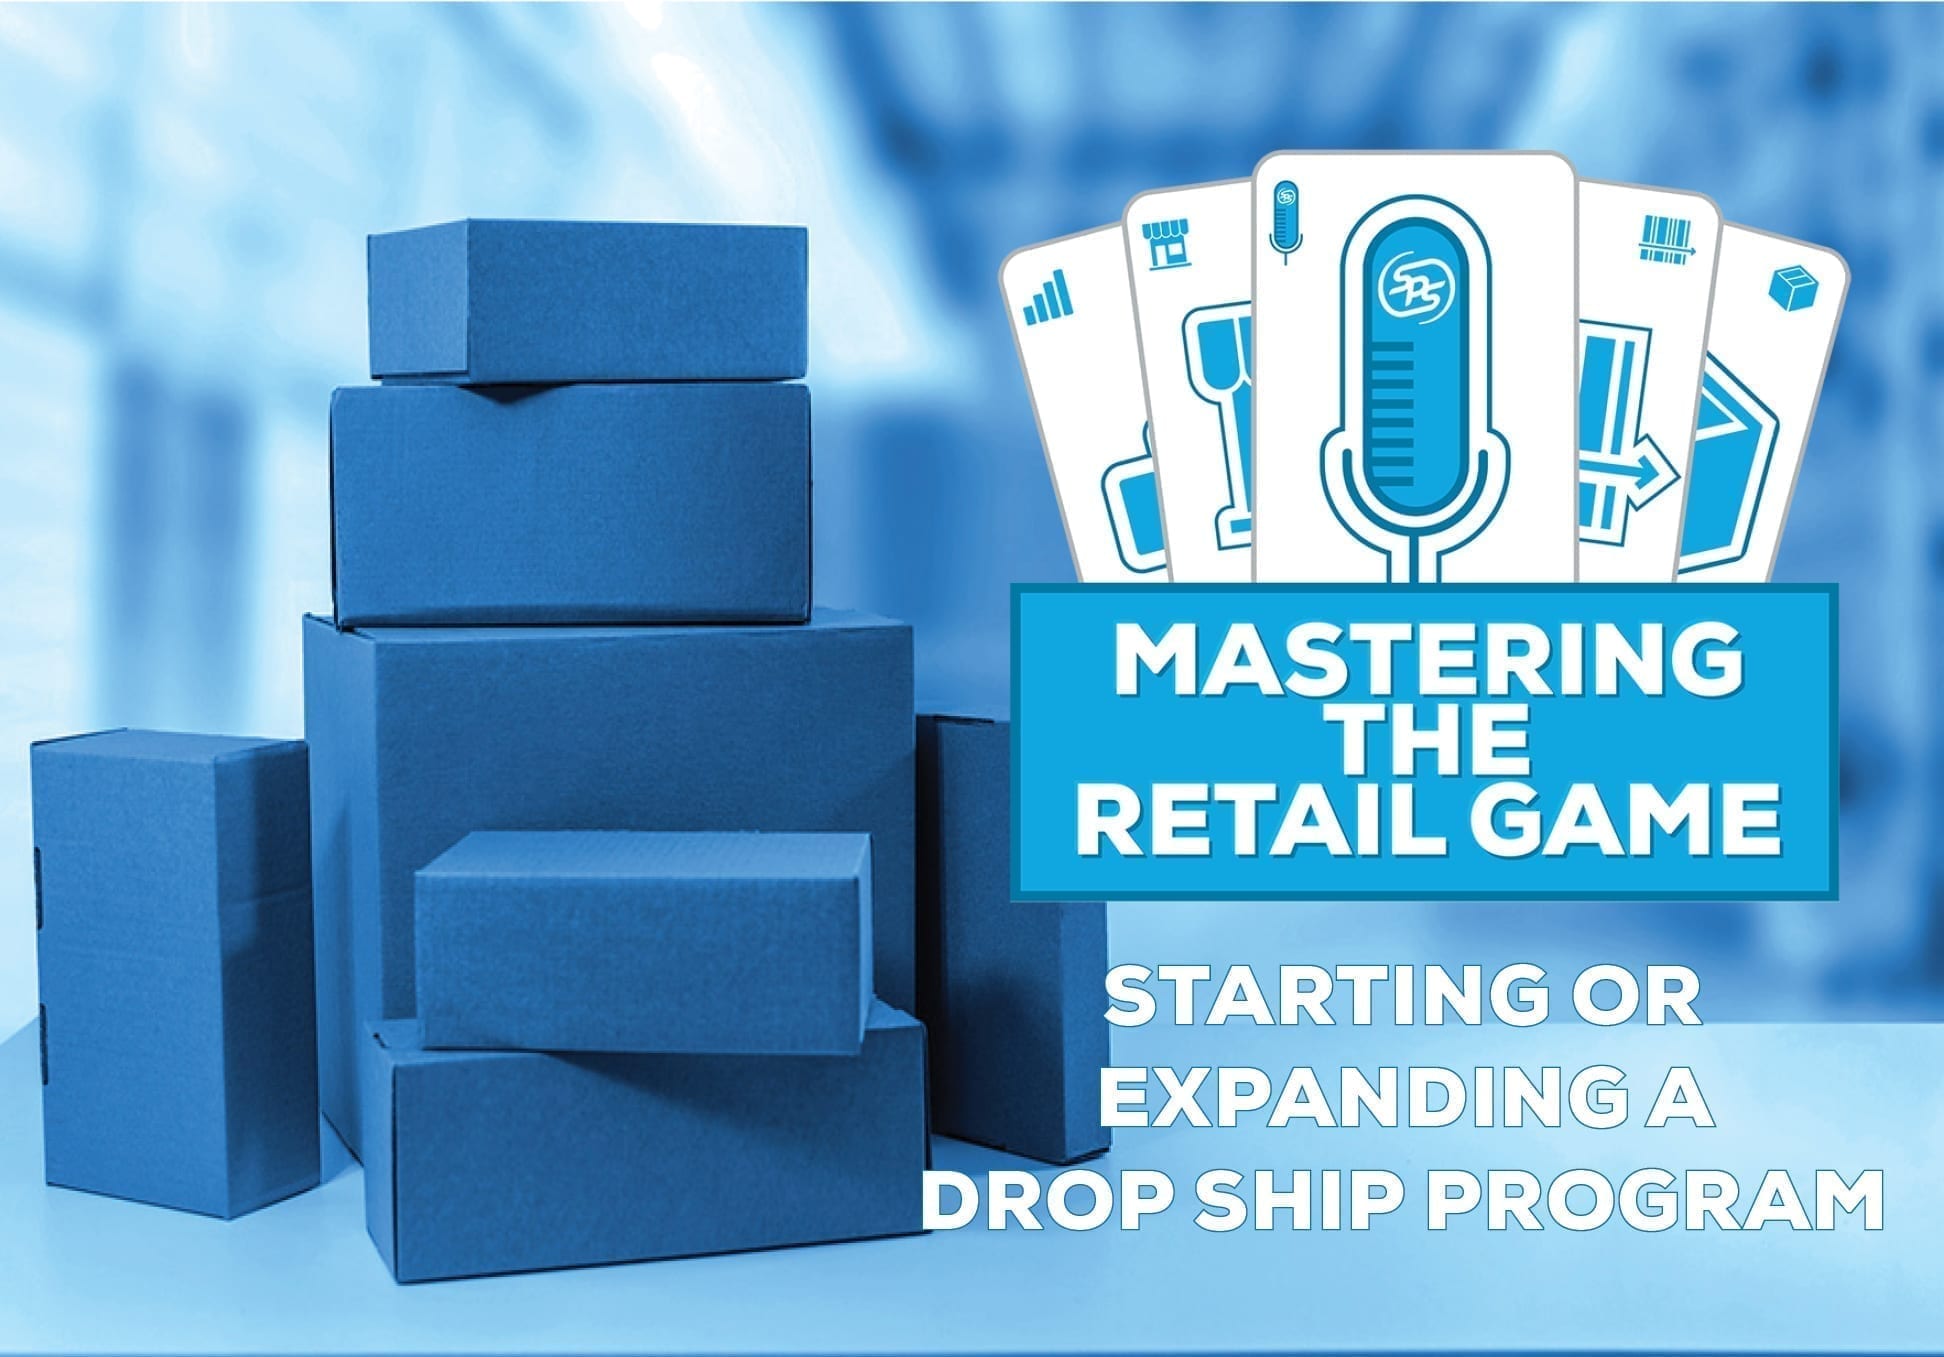 Mastering the Retail Game - Starting or Expanding a Drop Shipping Program